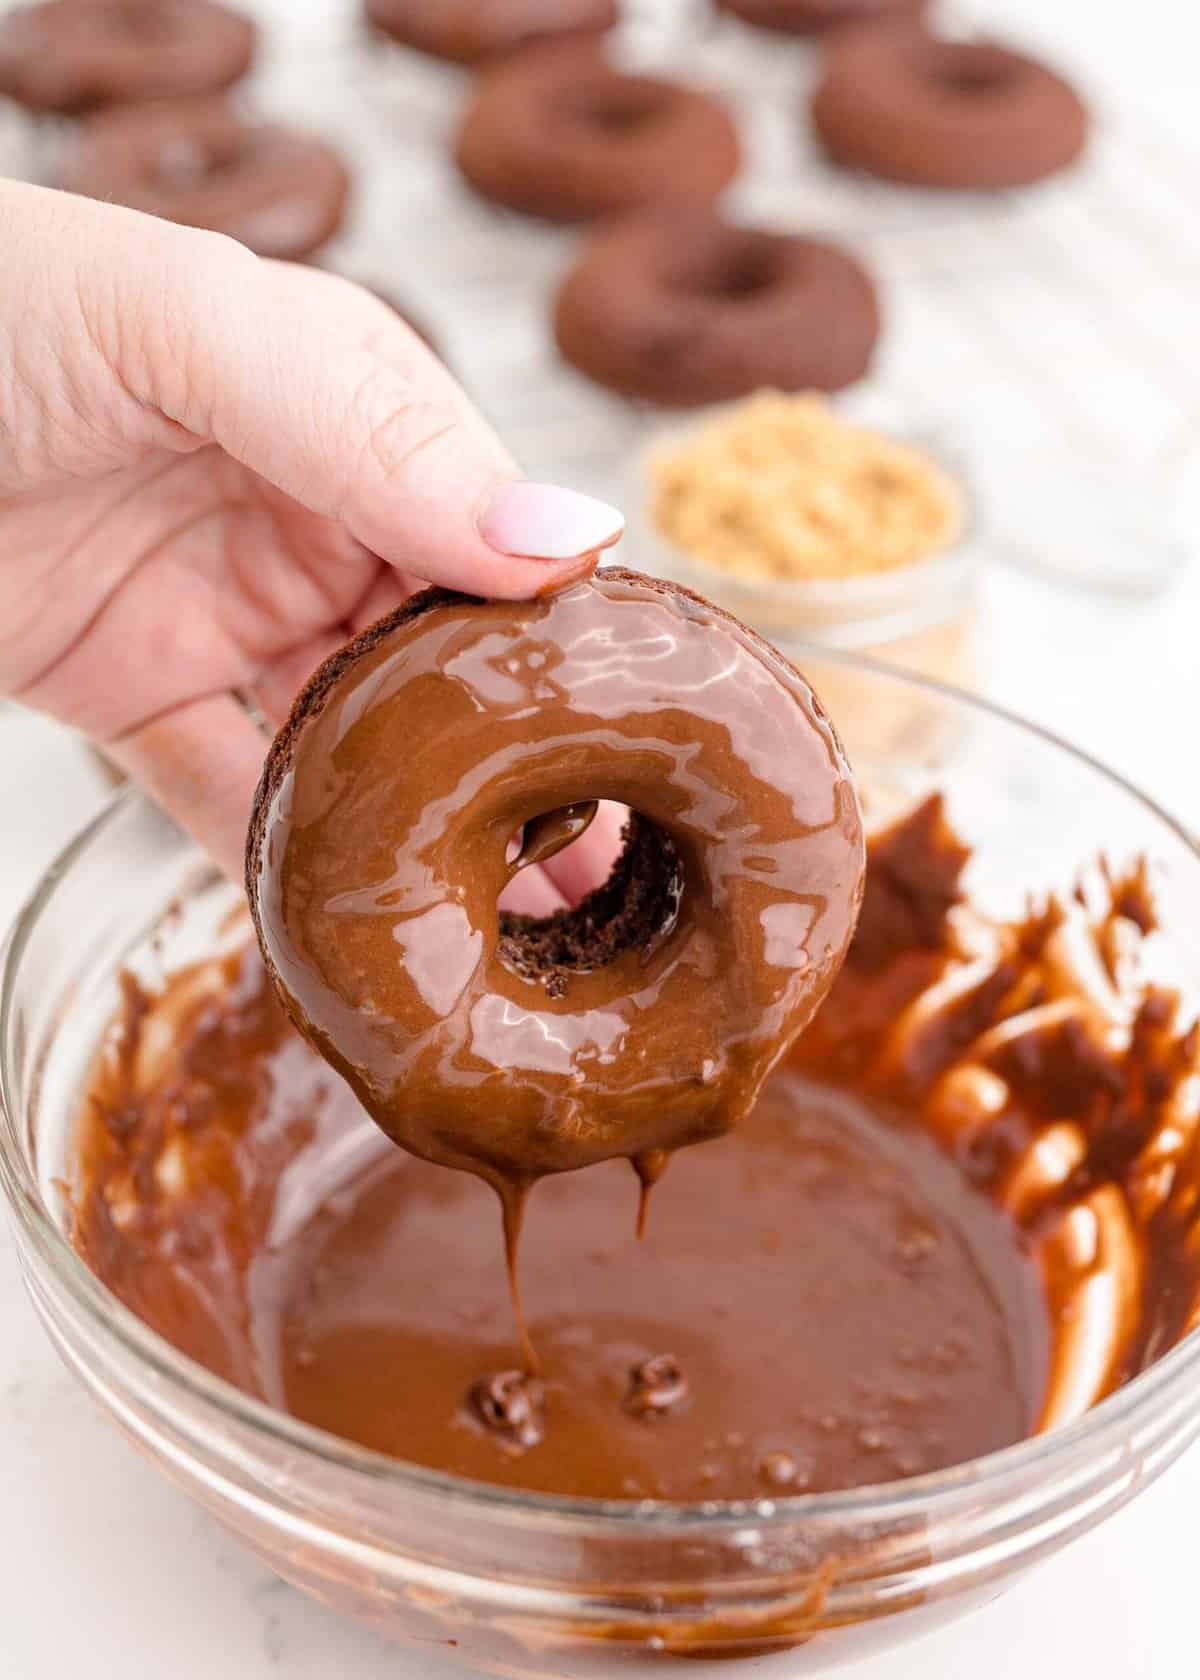 a donut is being dunked into chocolate frosting